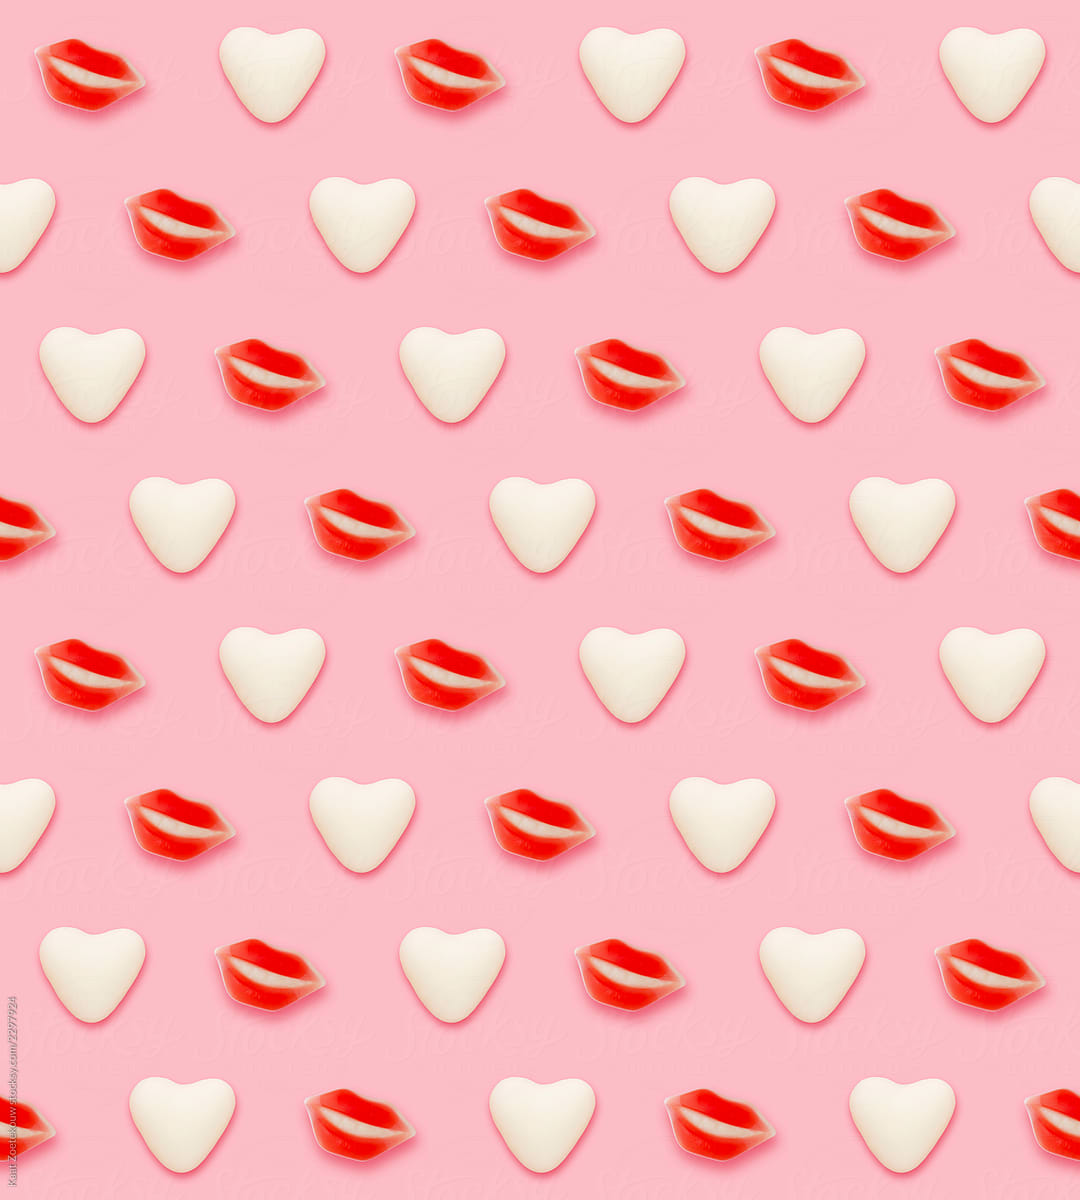 Lips and hearts patterned on pink